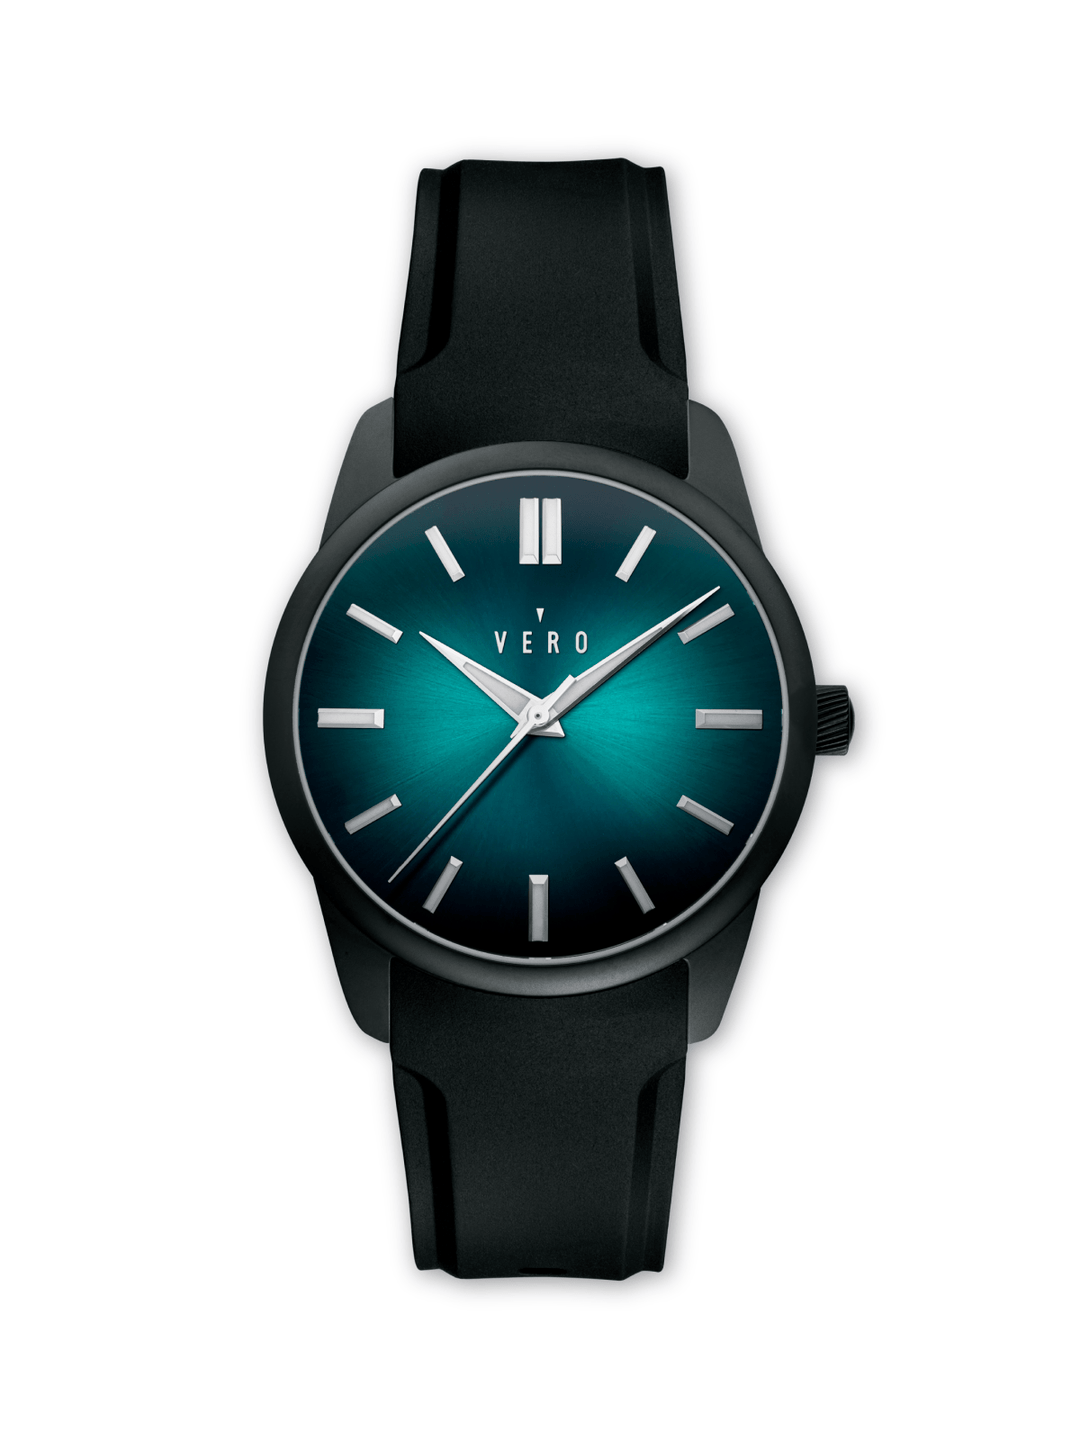 SW - Q Clear Lake Turquoise - VERO Watch Company